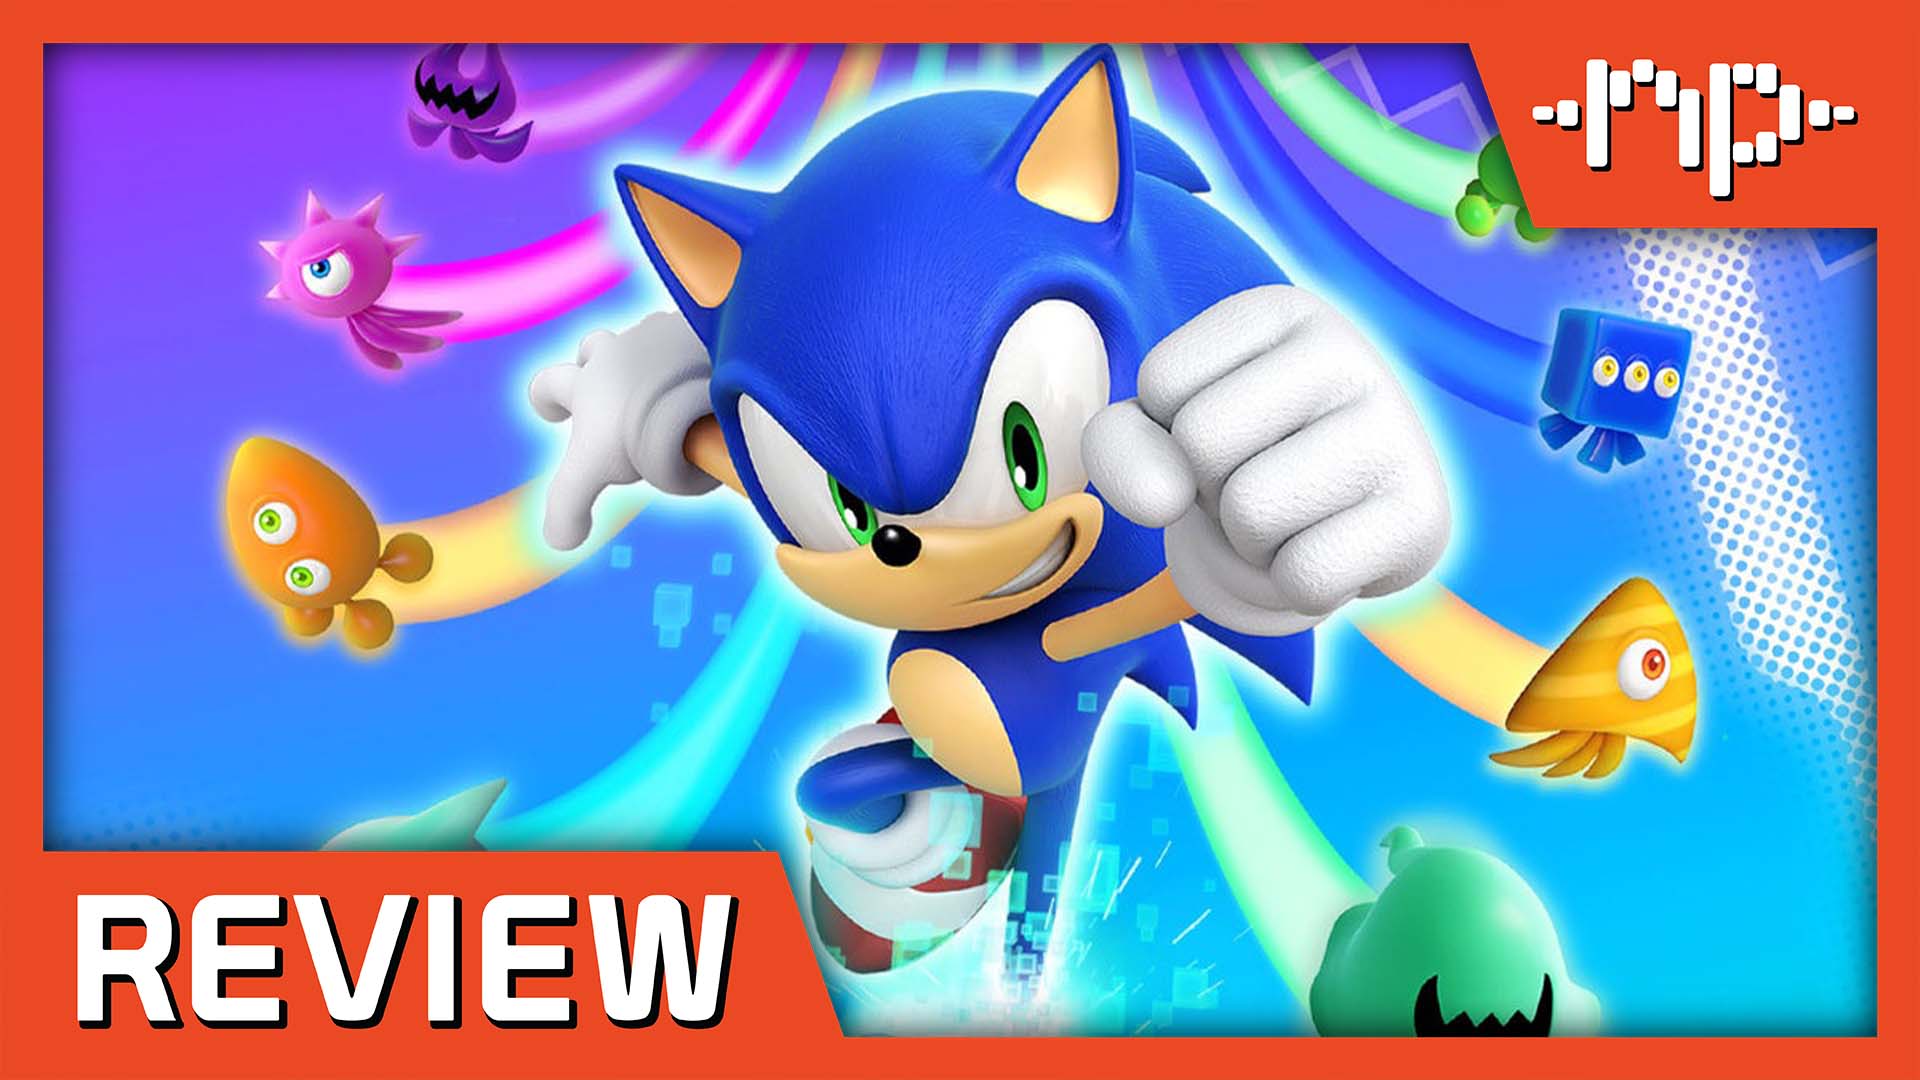 Sonic Colors Ultimate – SideQuesting